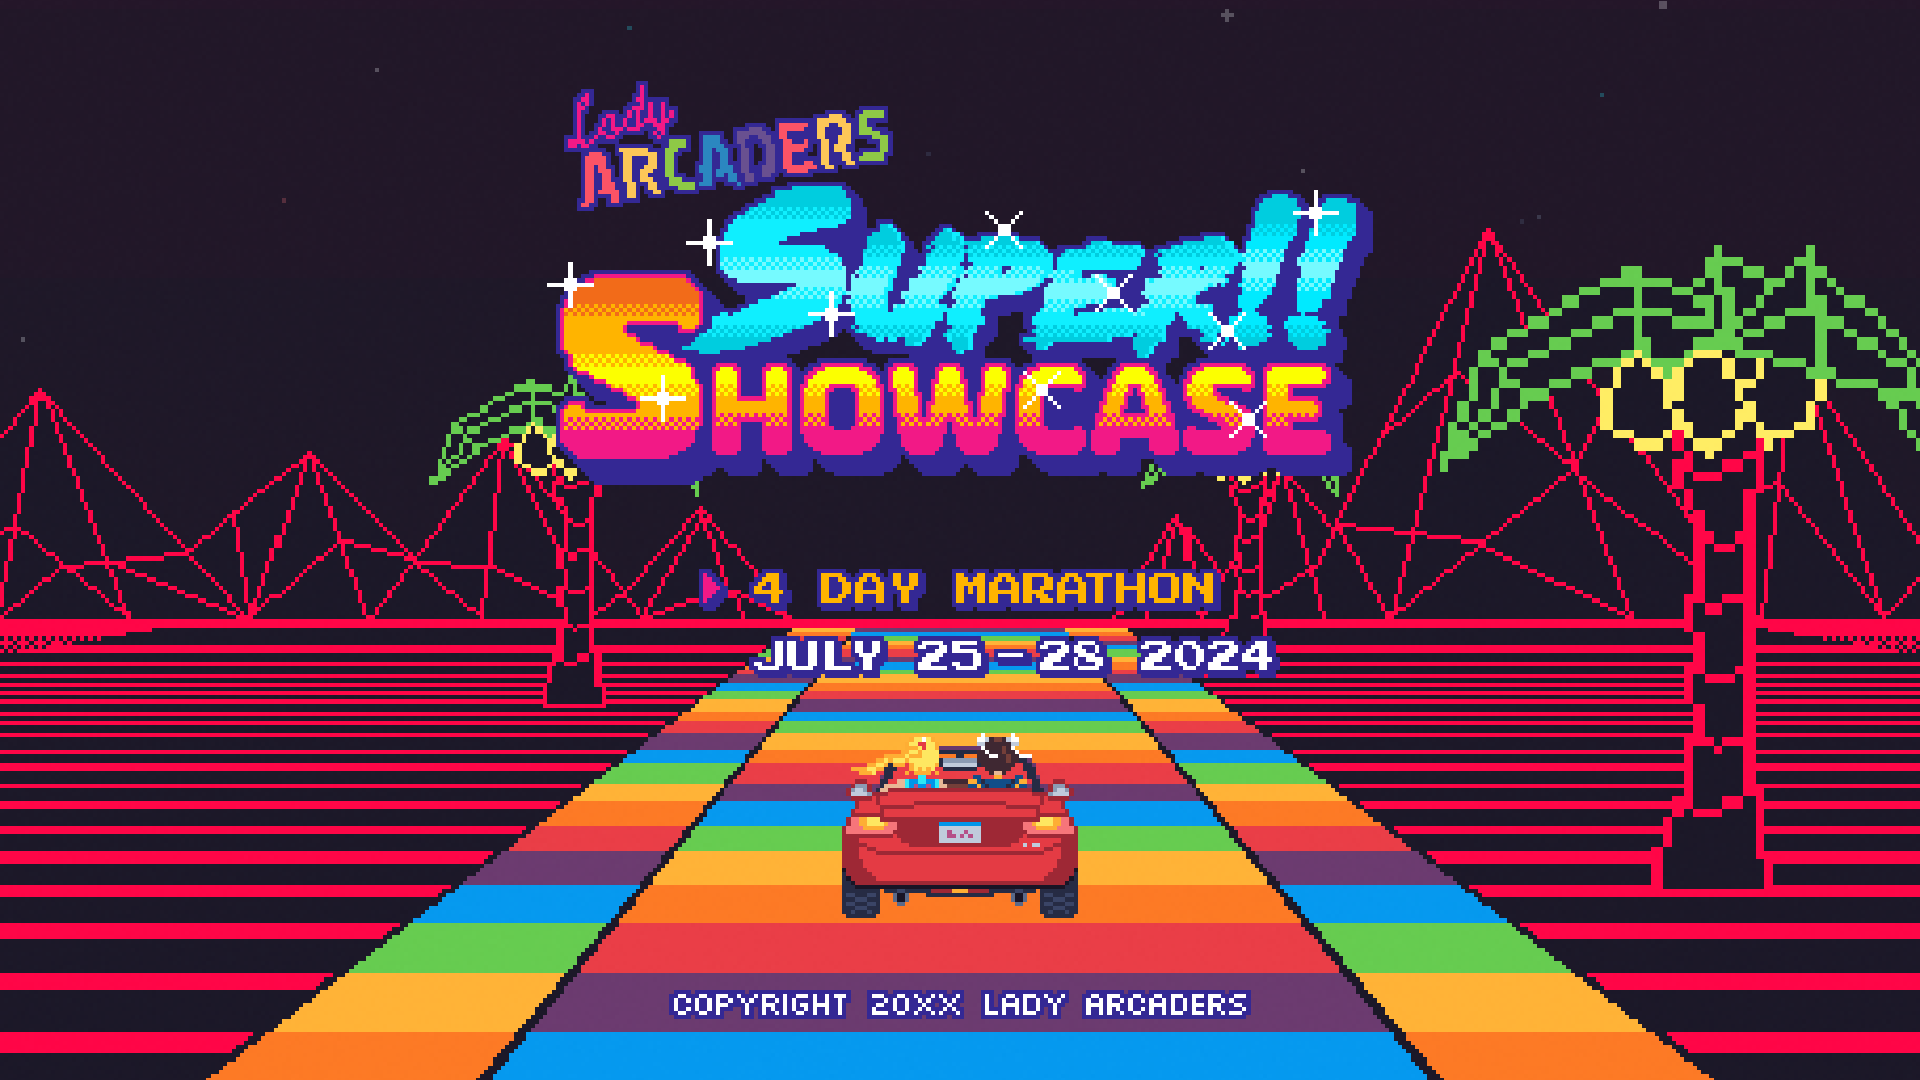 Lady Arcaders Super Showcase 2024 submissions are now open!